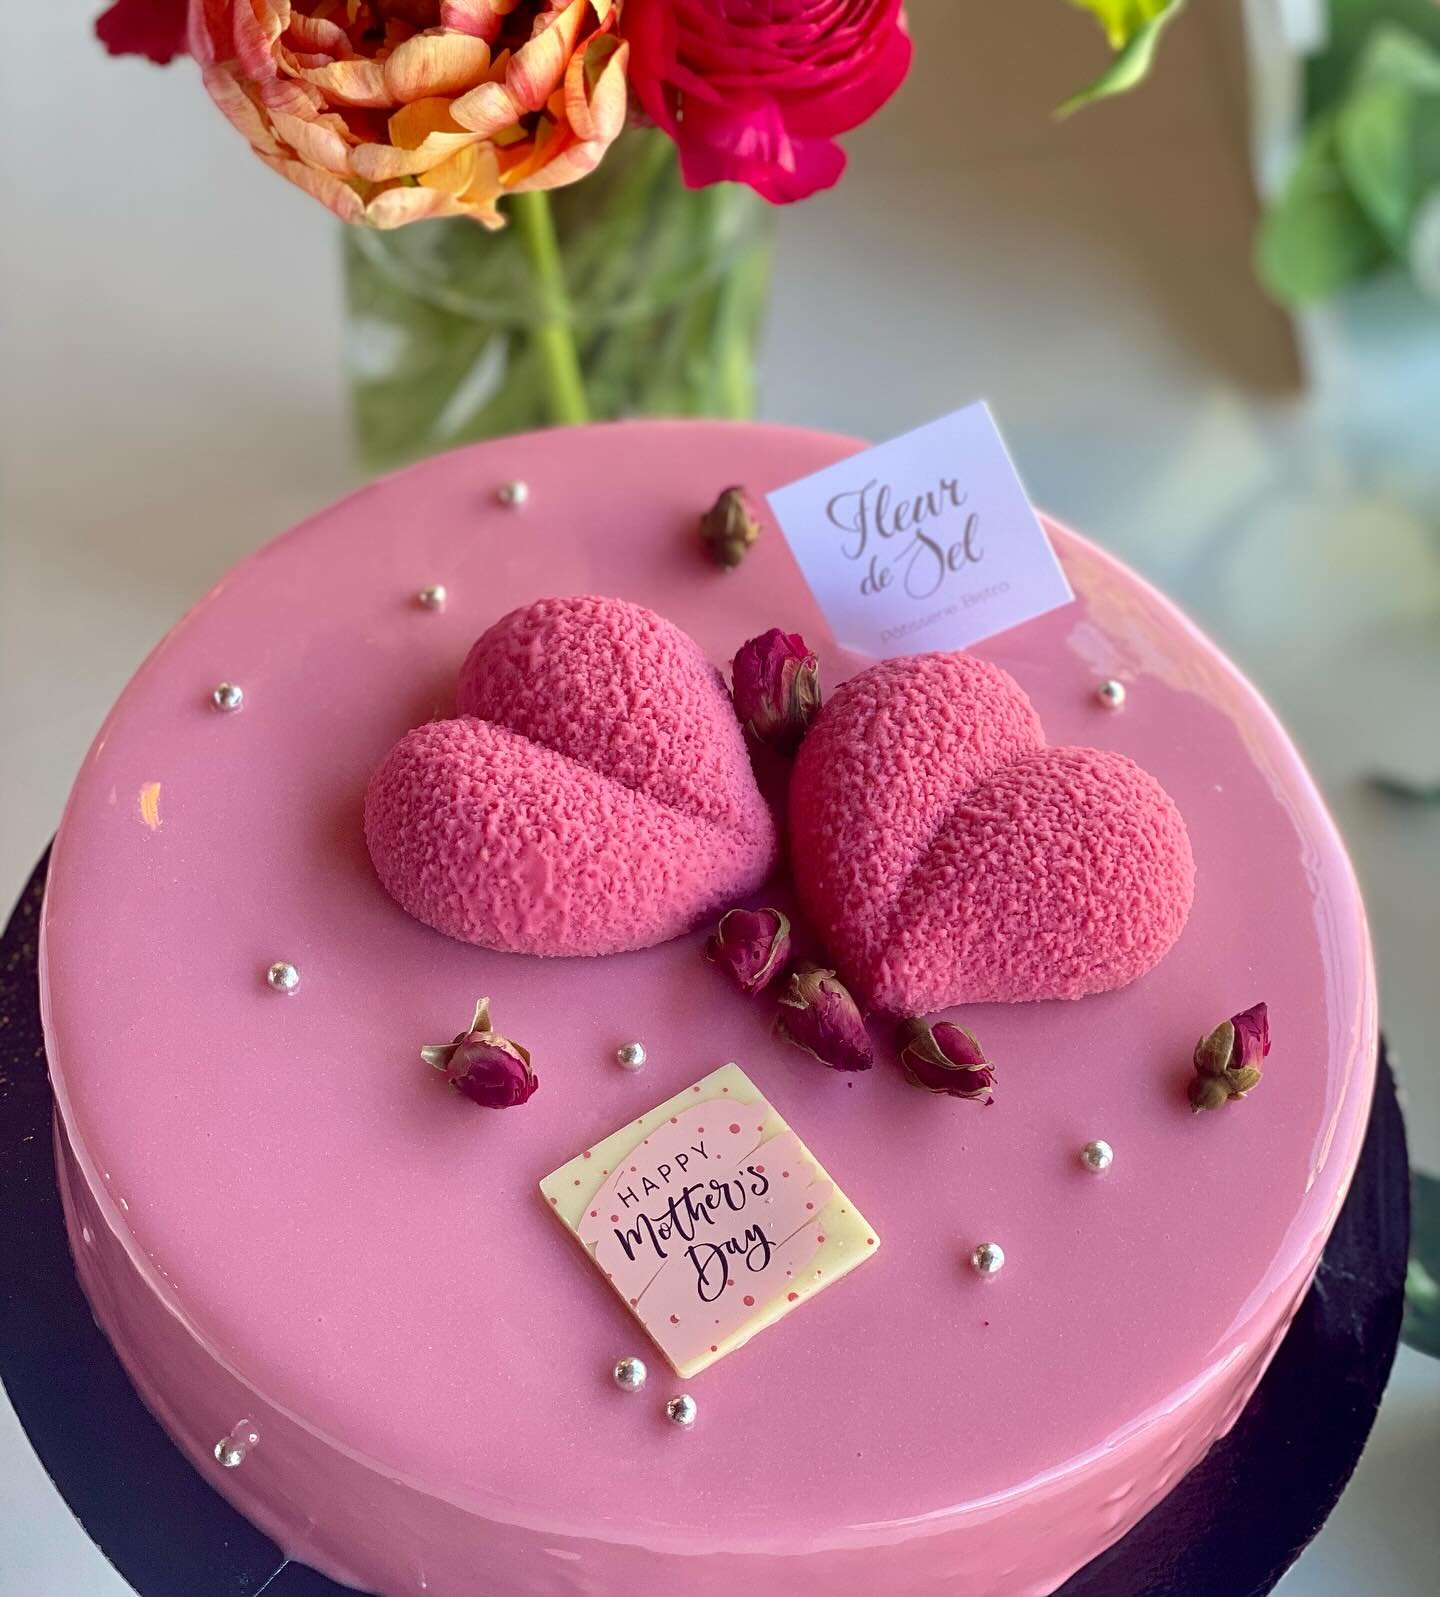 Our Mother Day&rsquo;s Special: Rose, lychee and raspberry cake. Available in 6inch, 8inch or 10inch.
STAY TUNED FOR MORE.
To place your order give us a call (973) 507-9865 or drop us a line orders@fleurdeselchathamnj.com

#morhersday2024 #morhersday